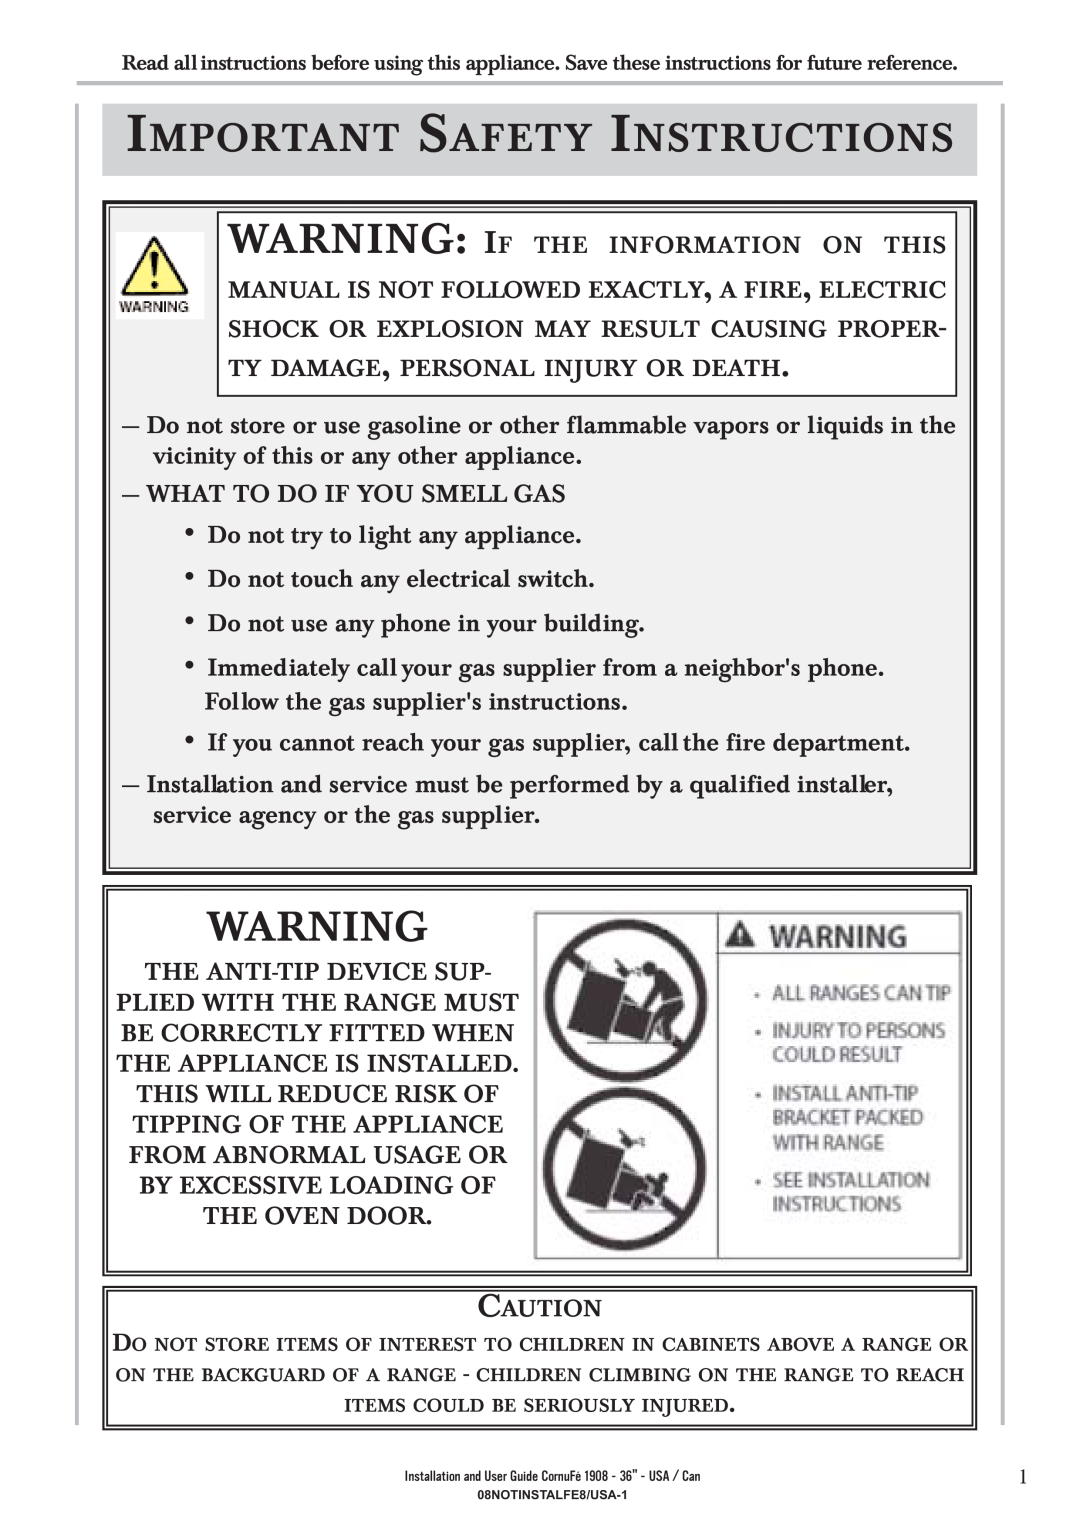 GE 1908 - 36 manual Important Safety Instructions 